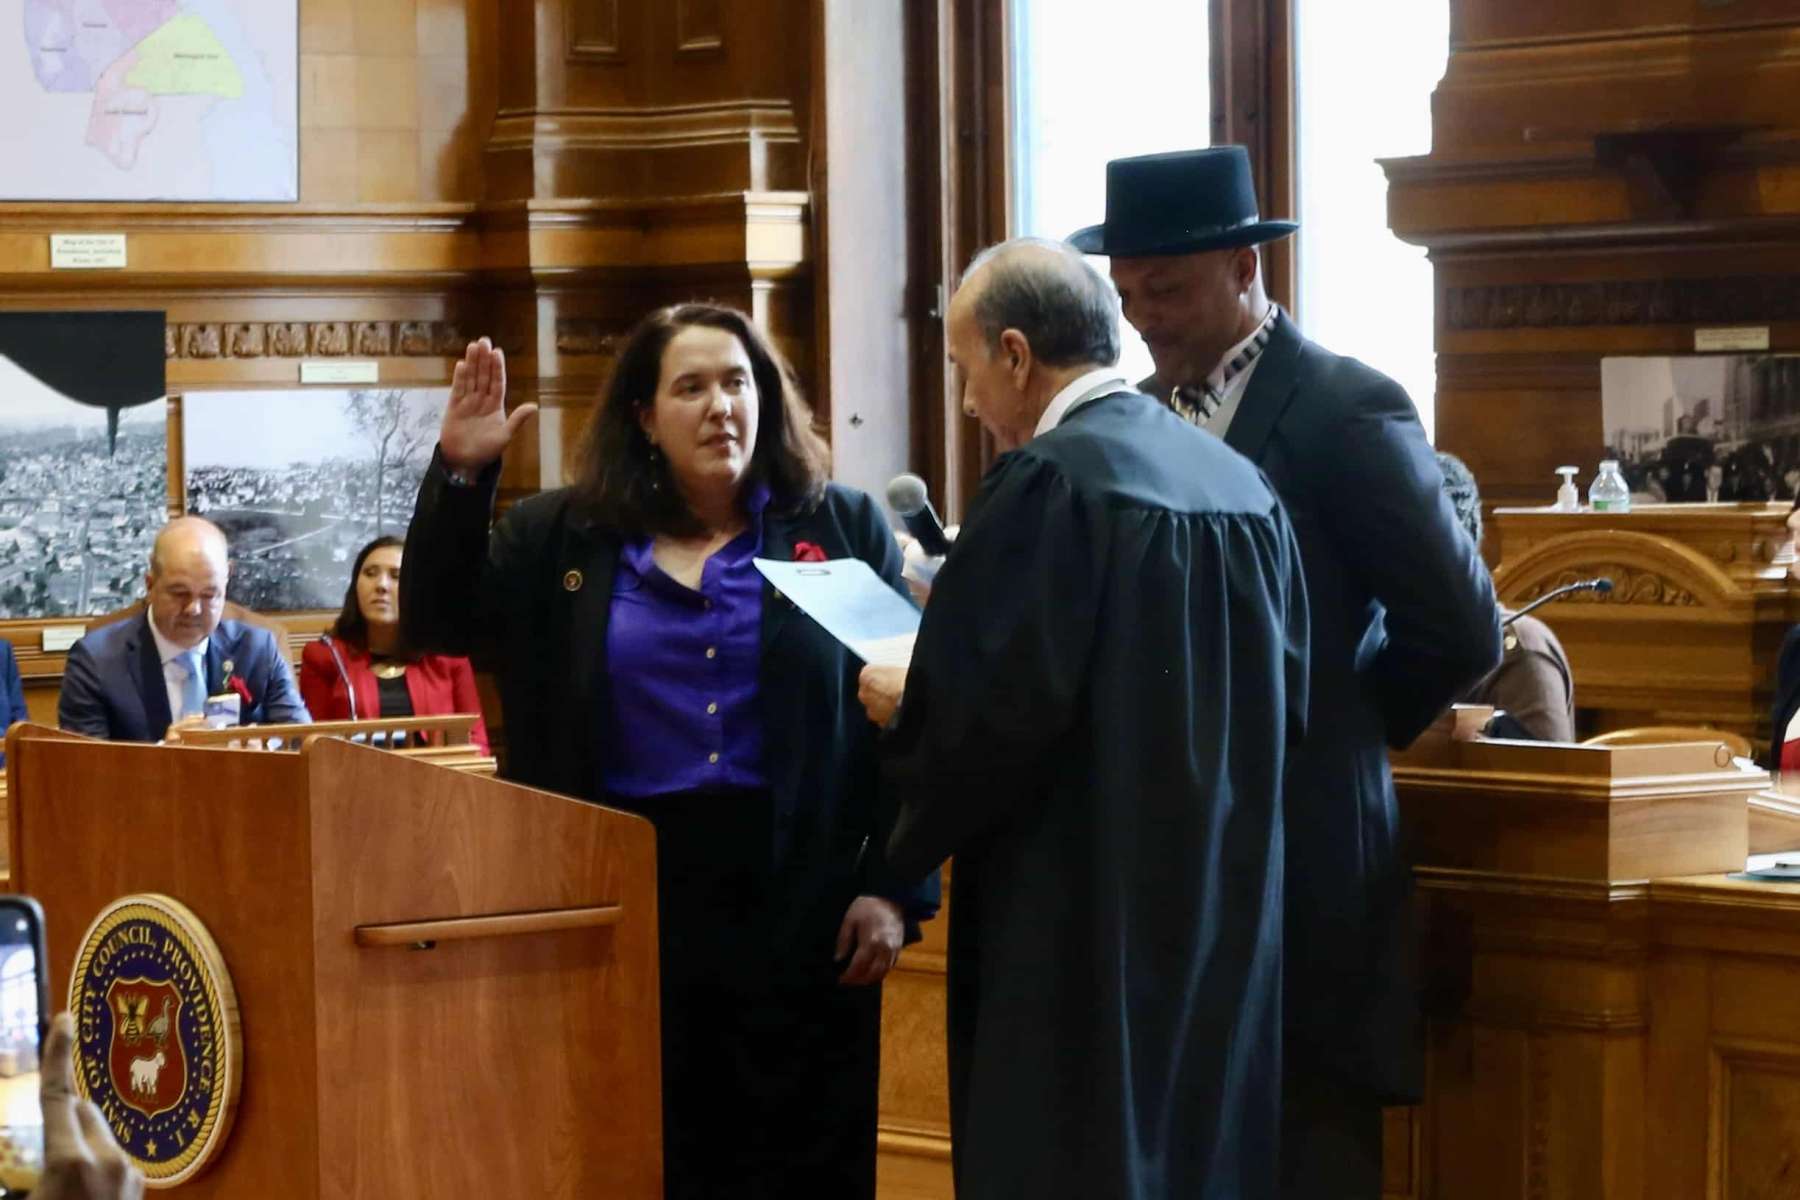 Rhode Island News: Rachel Miller elected as Providence City Council President in historic first